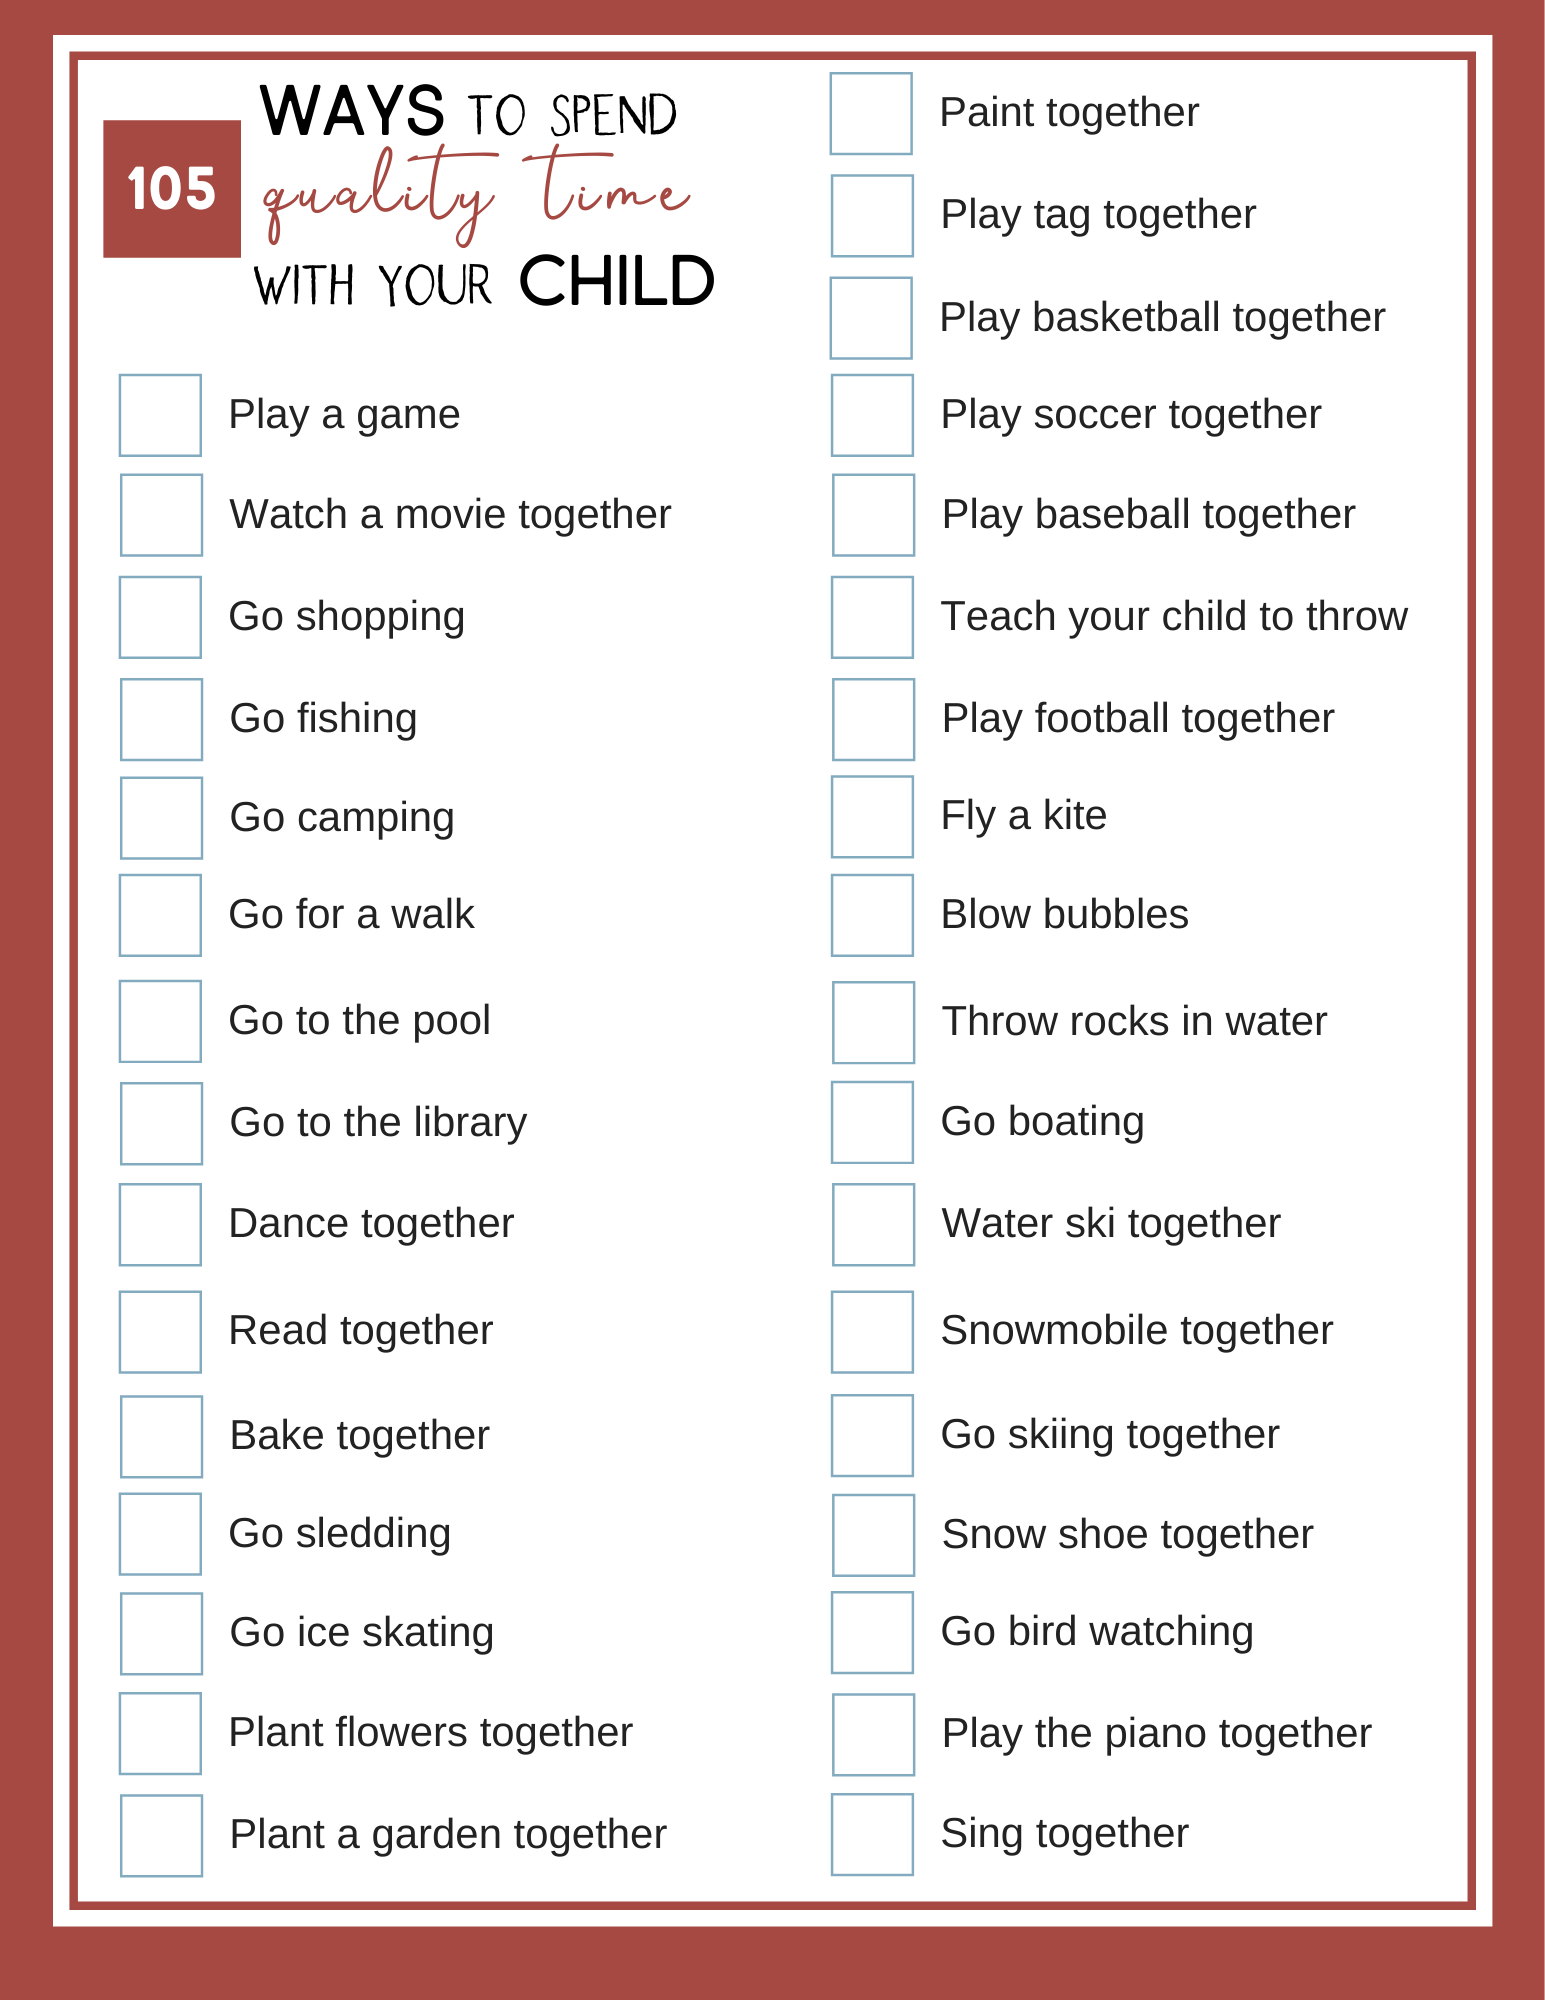 105 ways to spend quality time with your child.